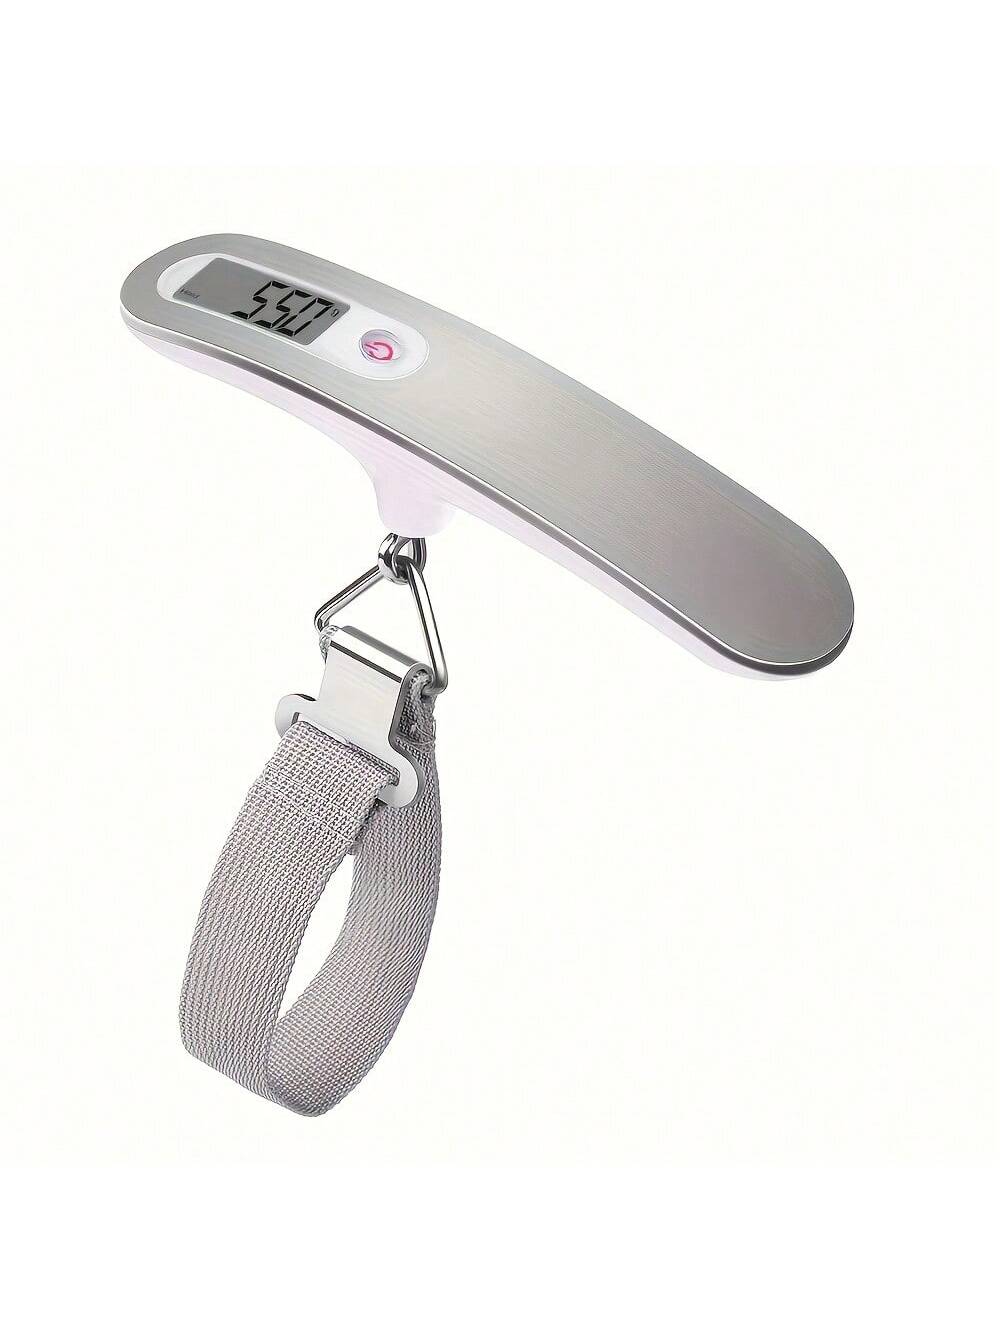 1pc Electronic Portable Luggage Scale For Weight Measurement Of Travel Bags Or Other Items - 50kg Capacity, Stainless Steel, With Strap And Backlit Display, Switchable Between Kg/lb, Powered By Cr2032 Battery - Great Christmas Gift-White-6